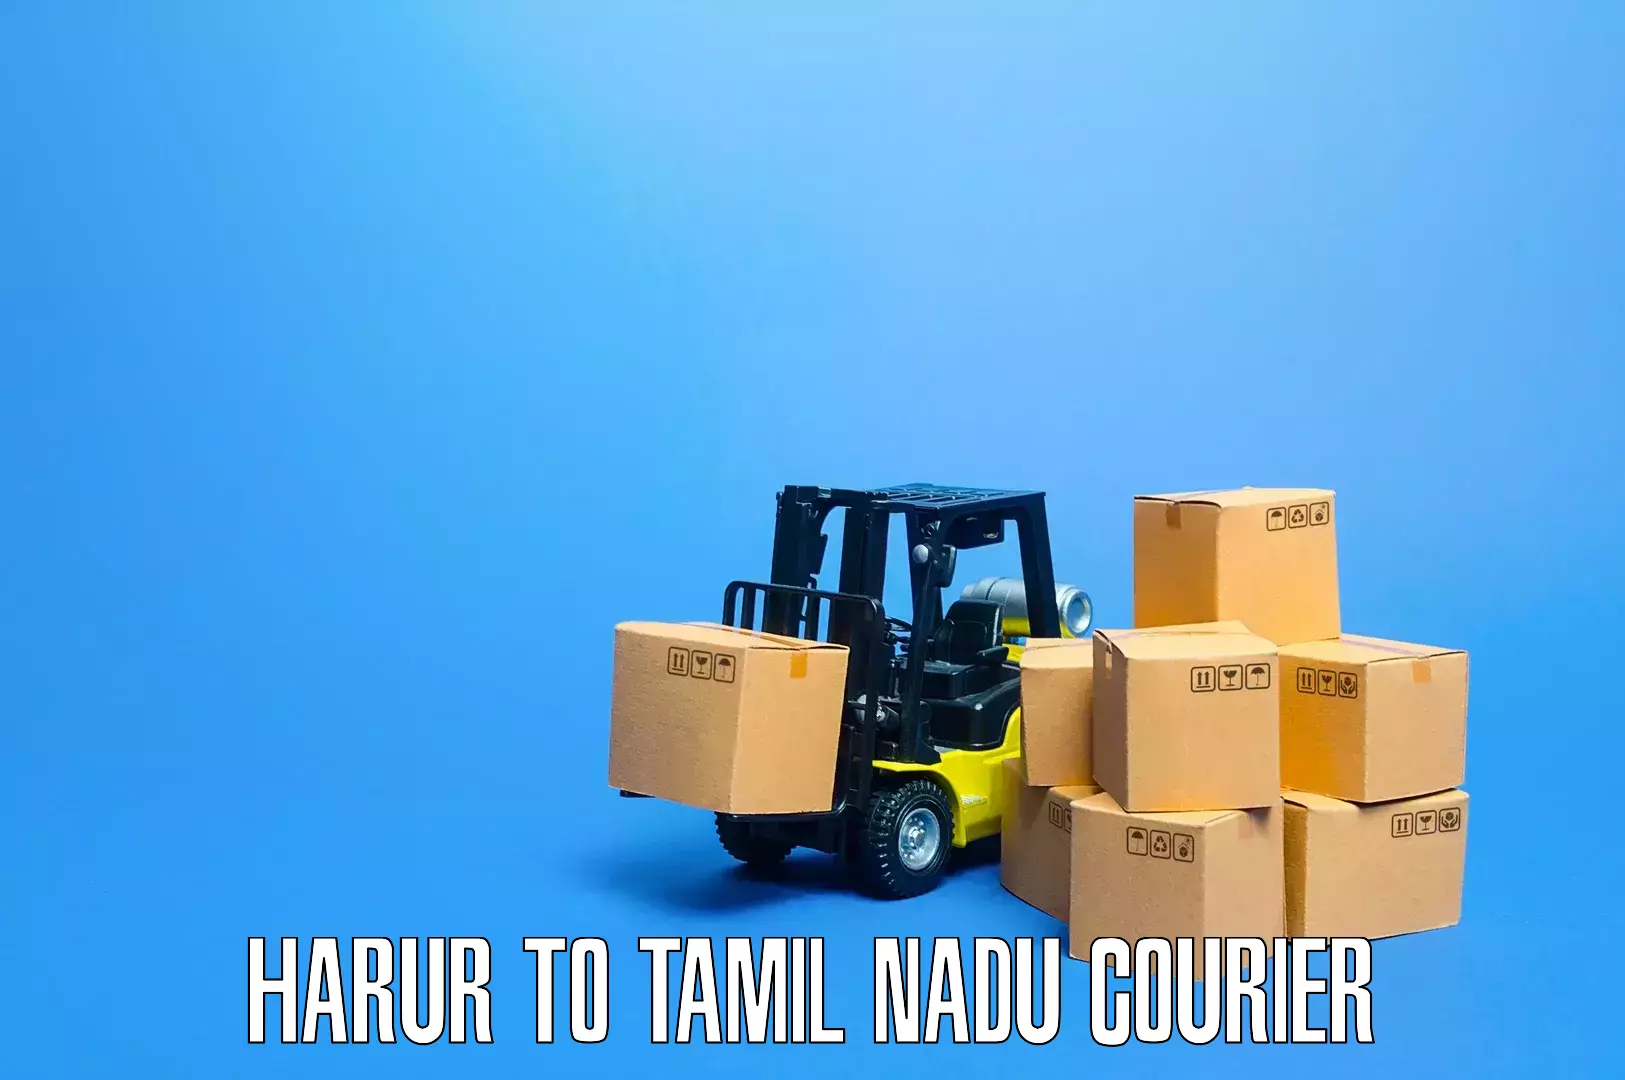 Specialized moving company Harur to Tamil Nadu